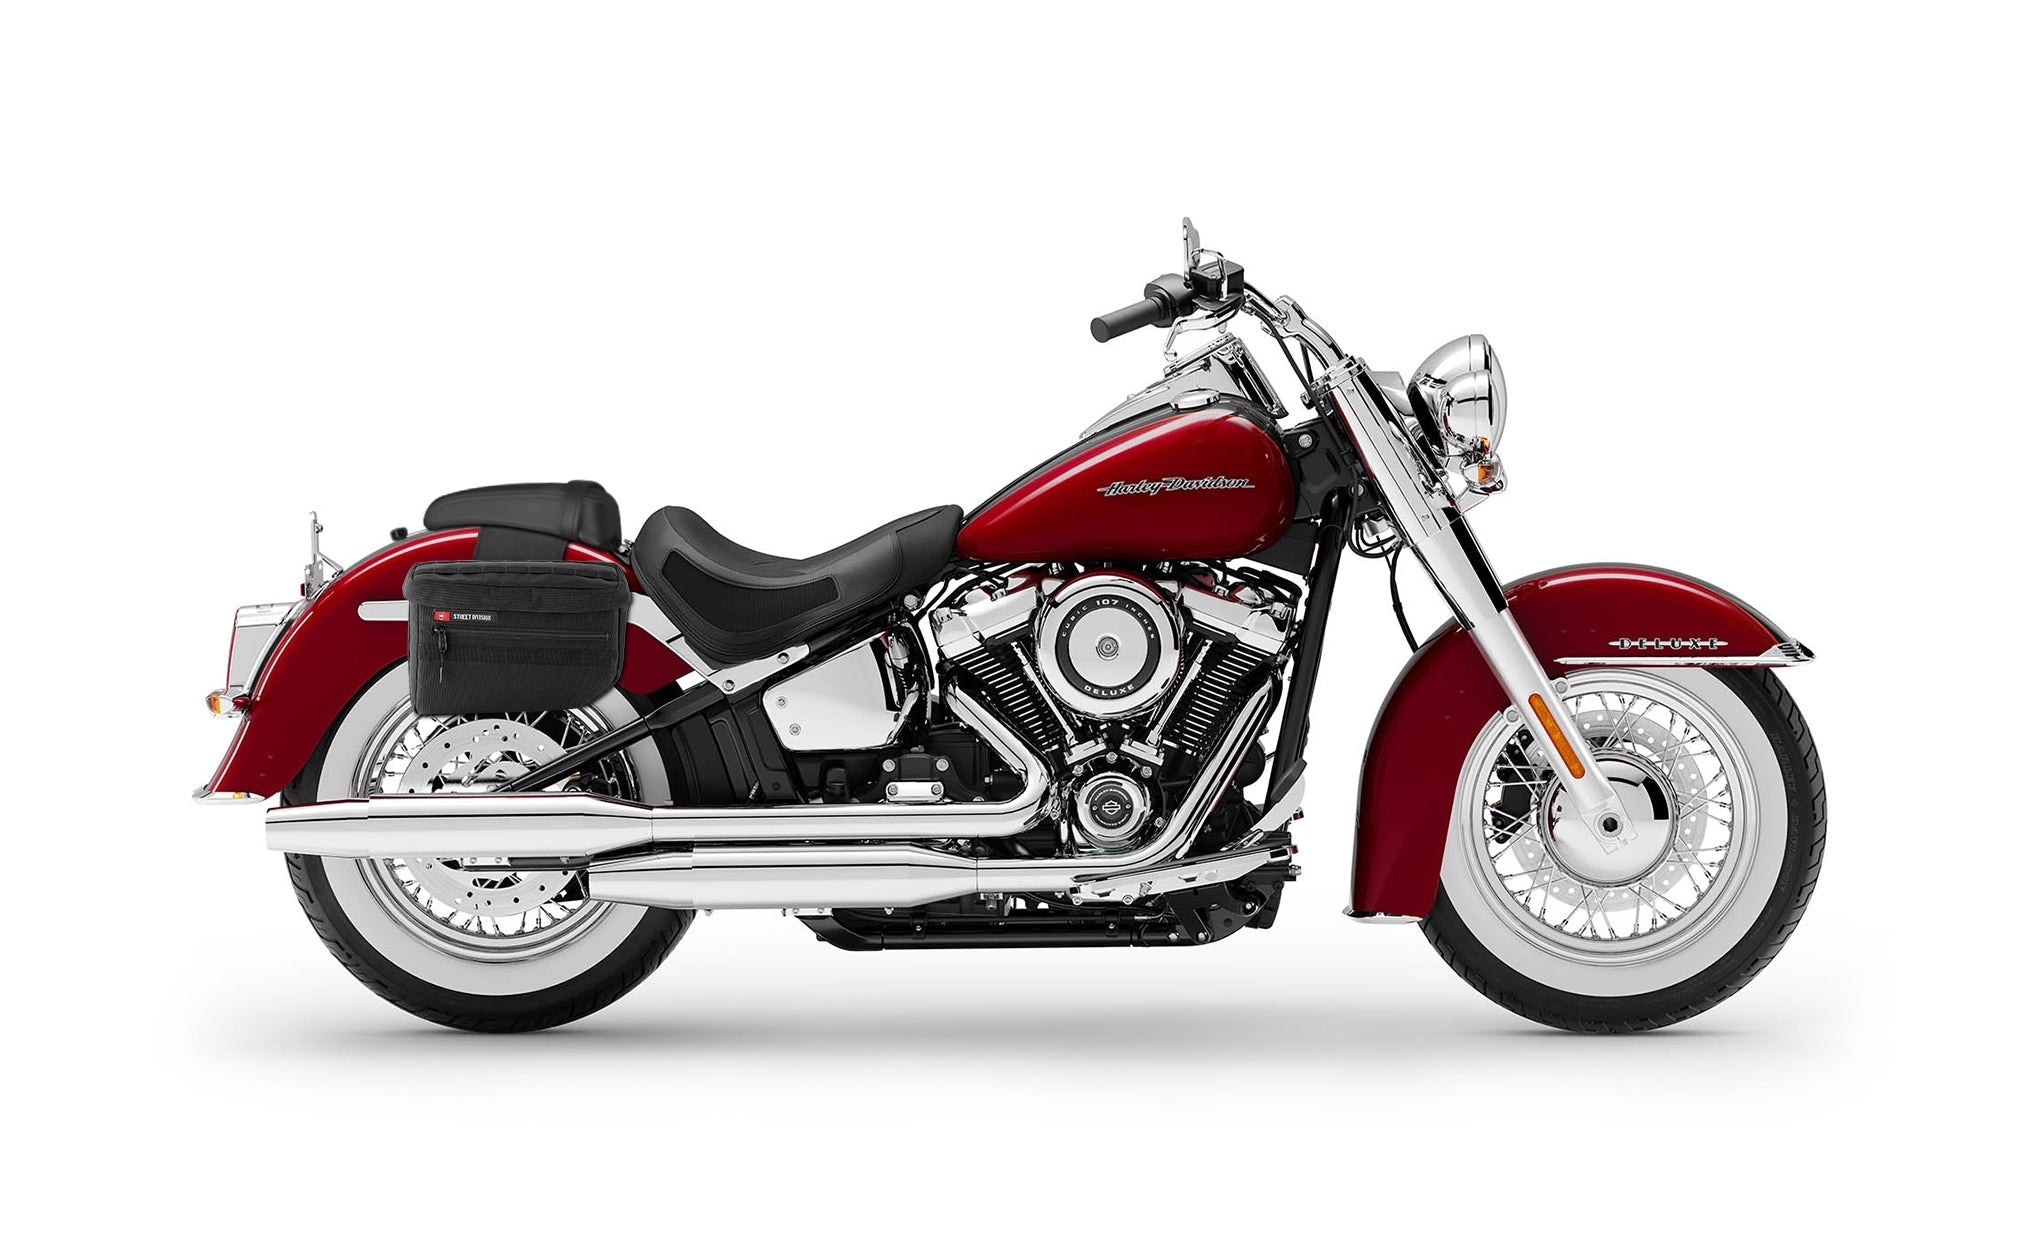 Viking Patriot Large Motorcycle Throw Over Saddlebags For Harley Softail Deluxe Flstn I on Bike Photo @expand